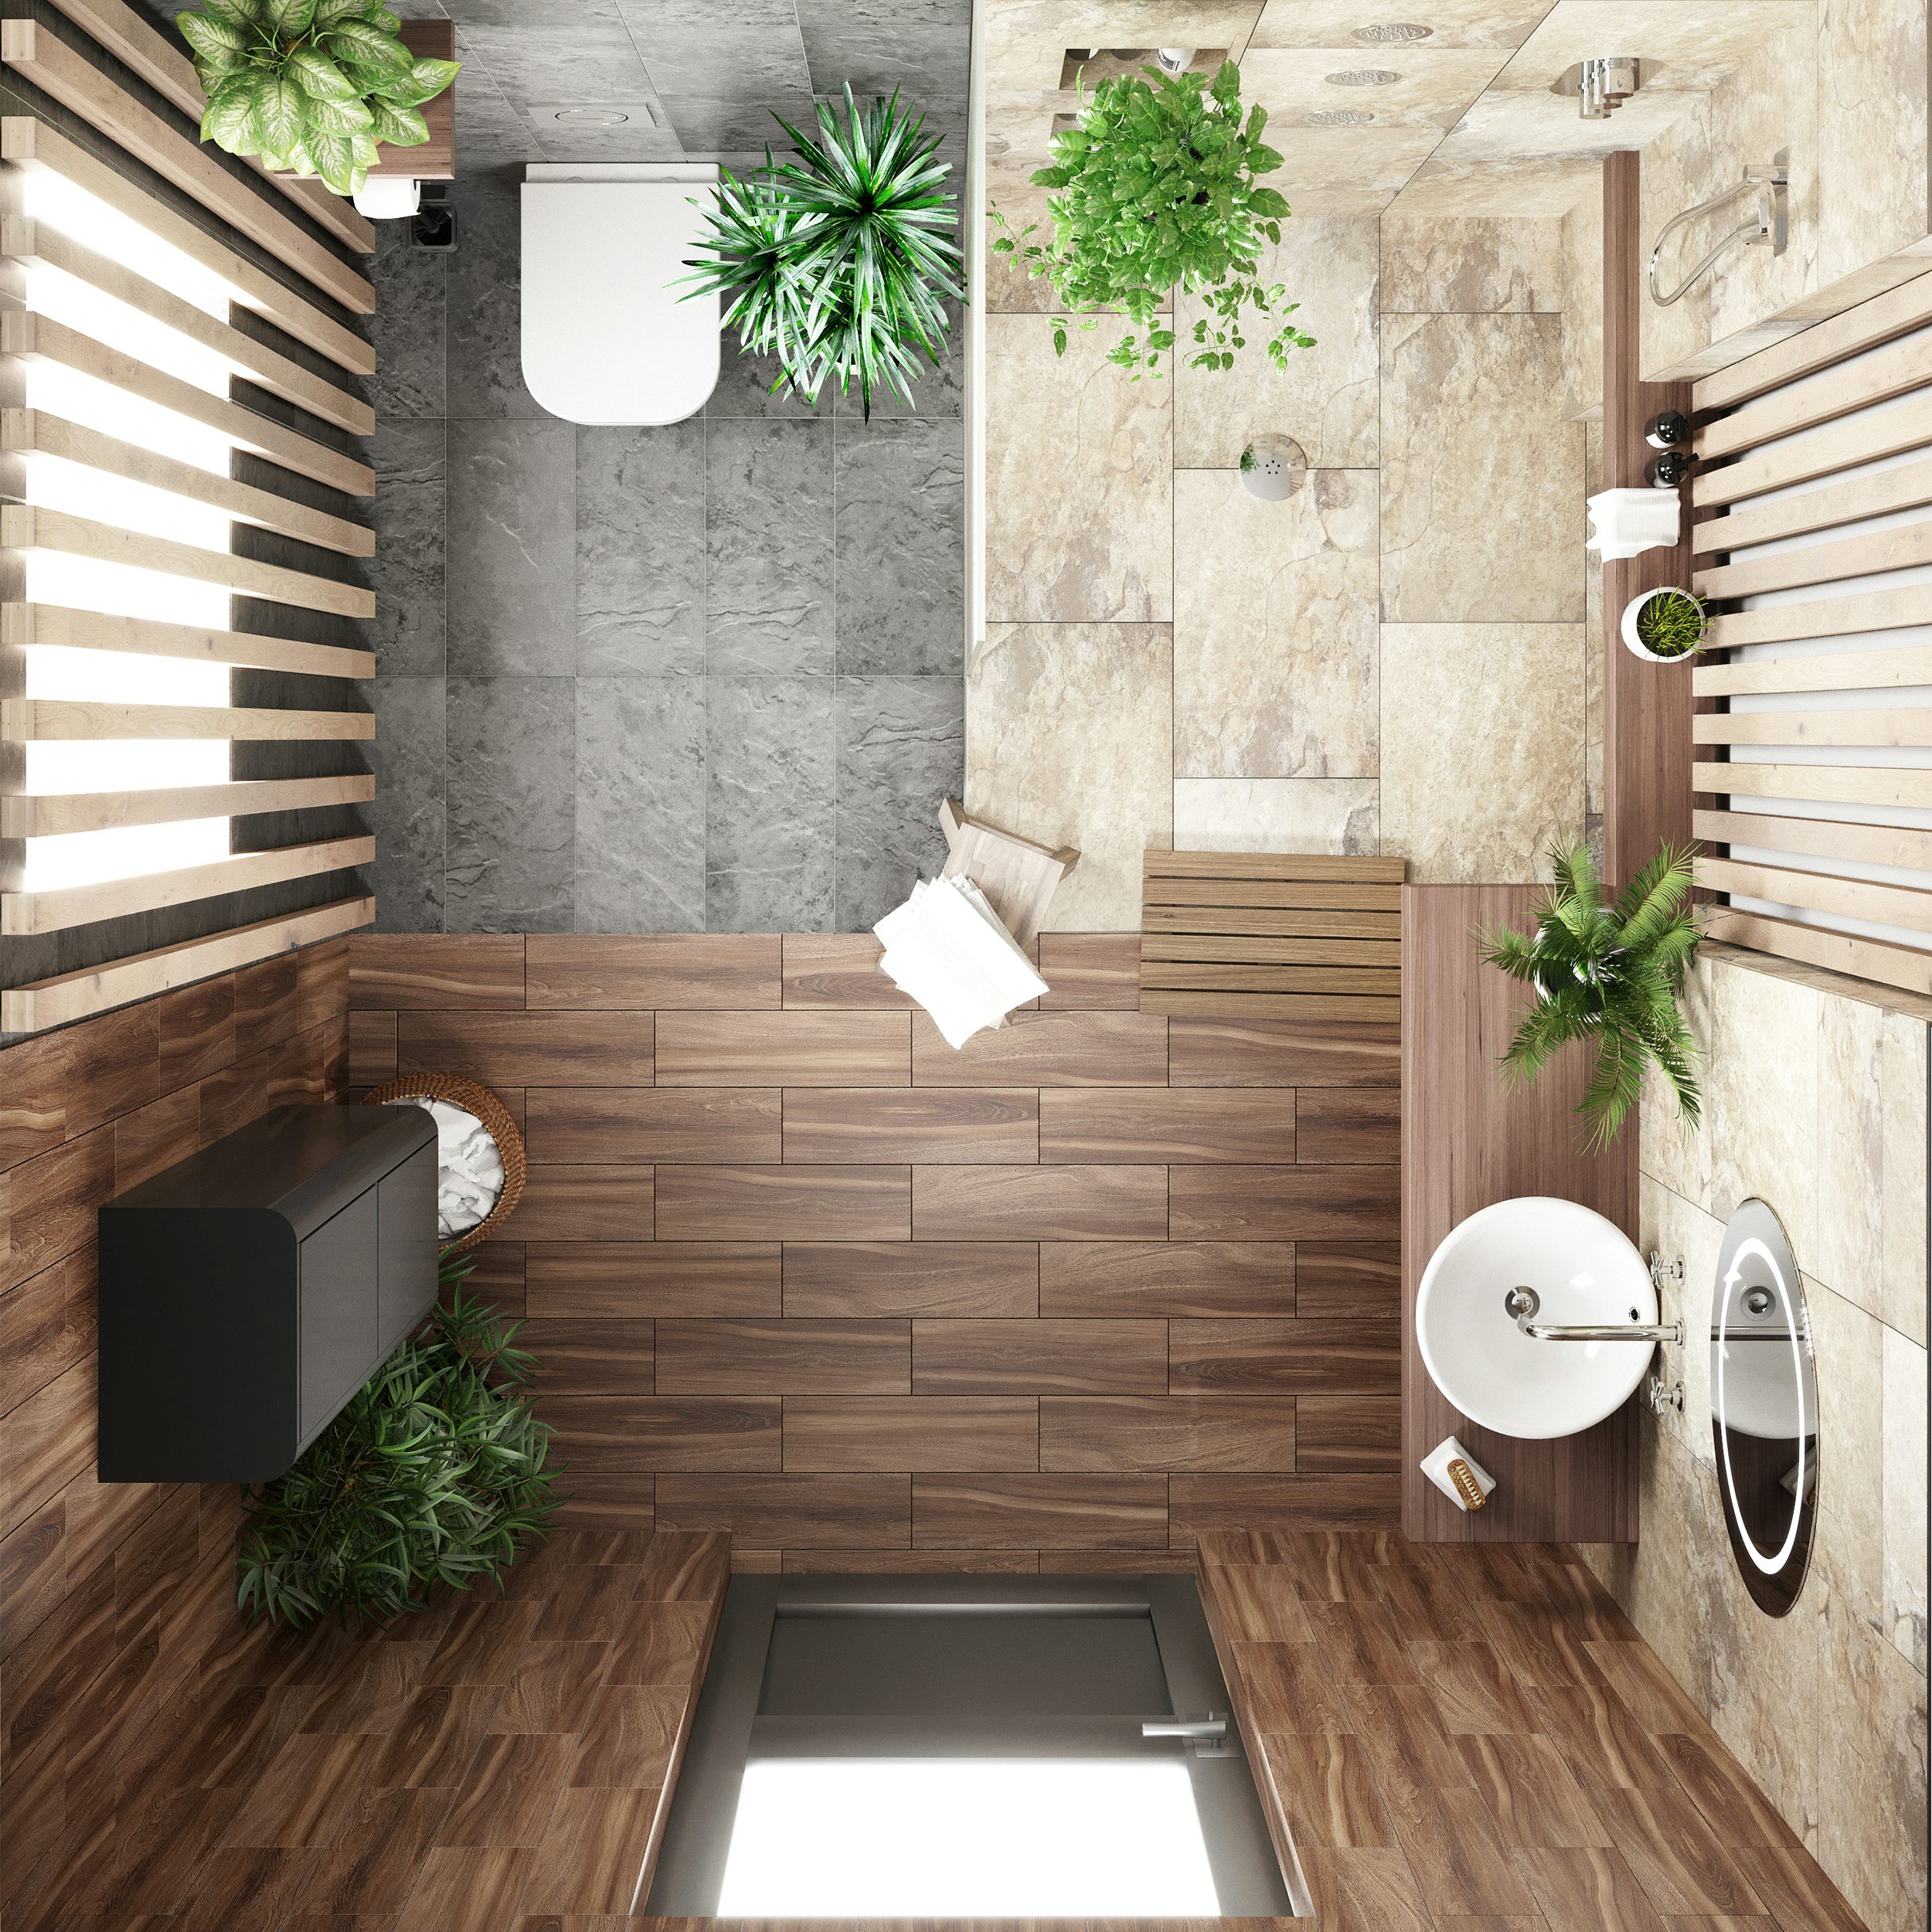 Wet room in a small bathroom